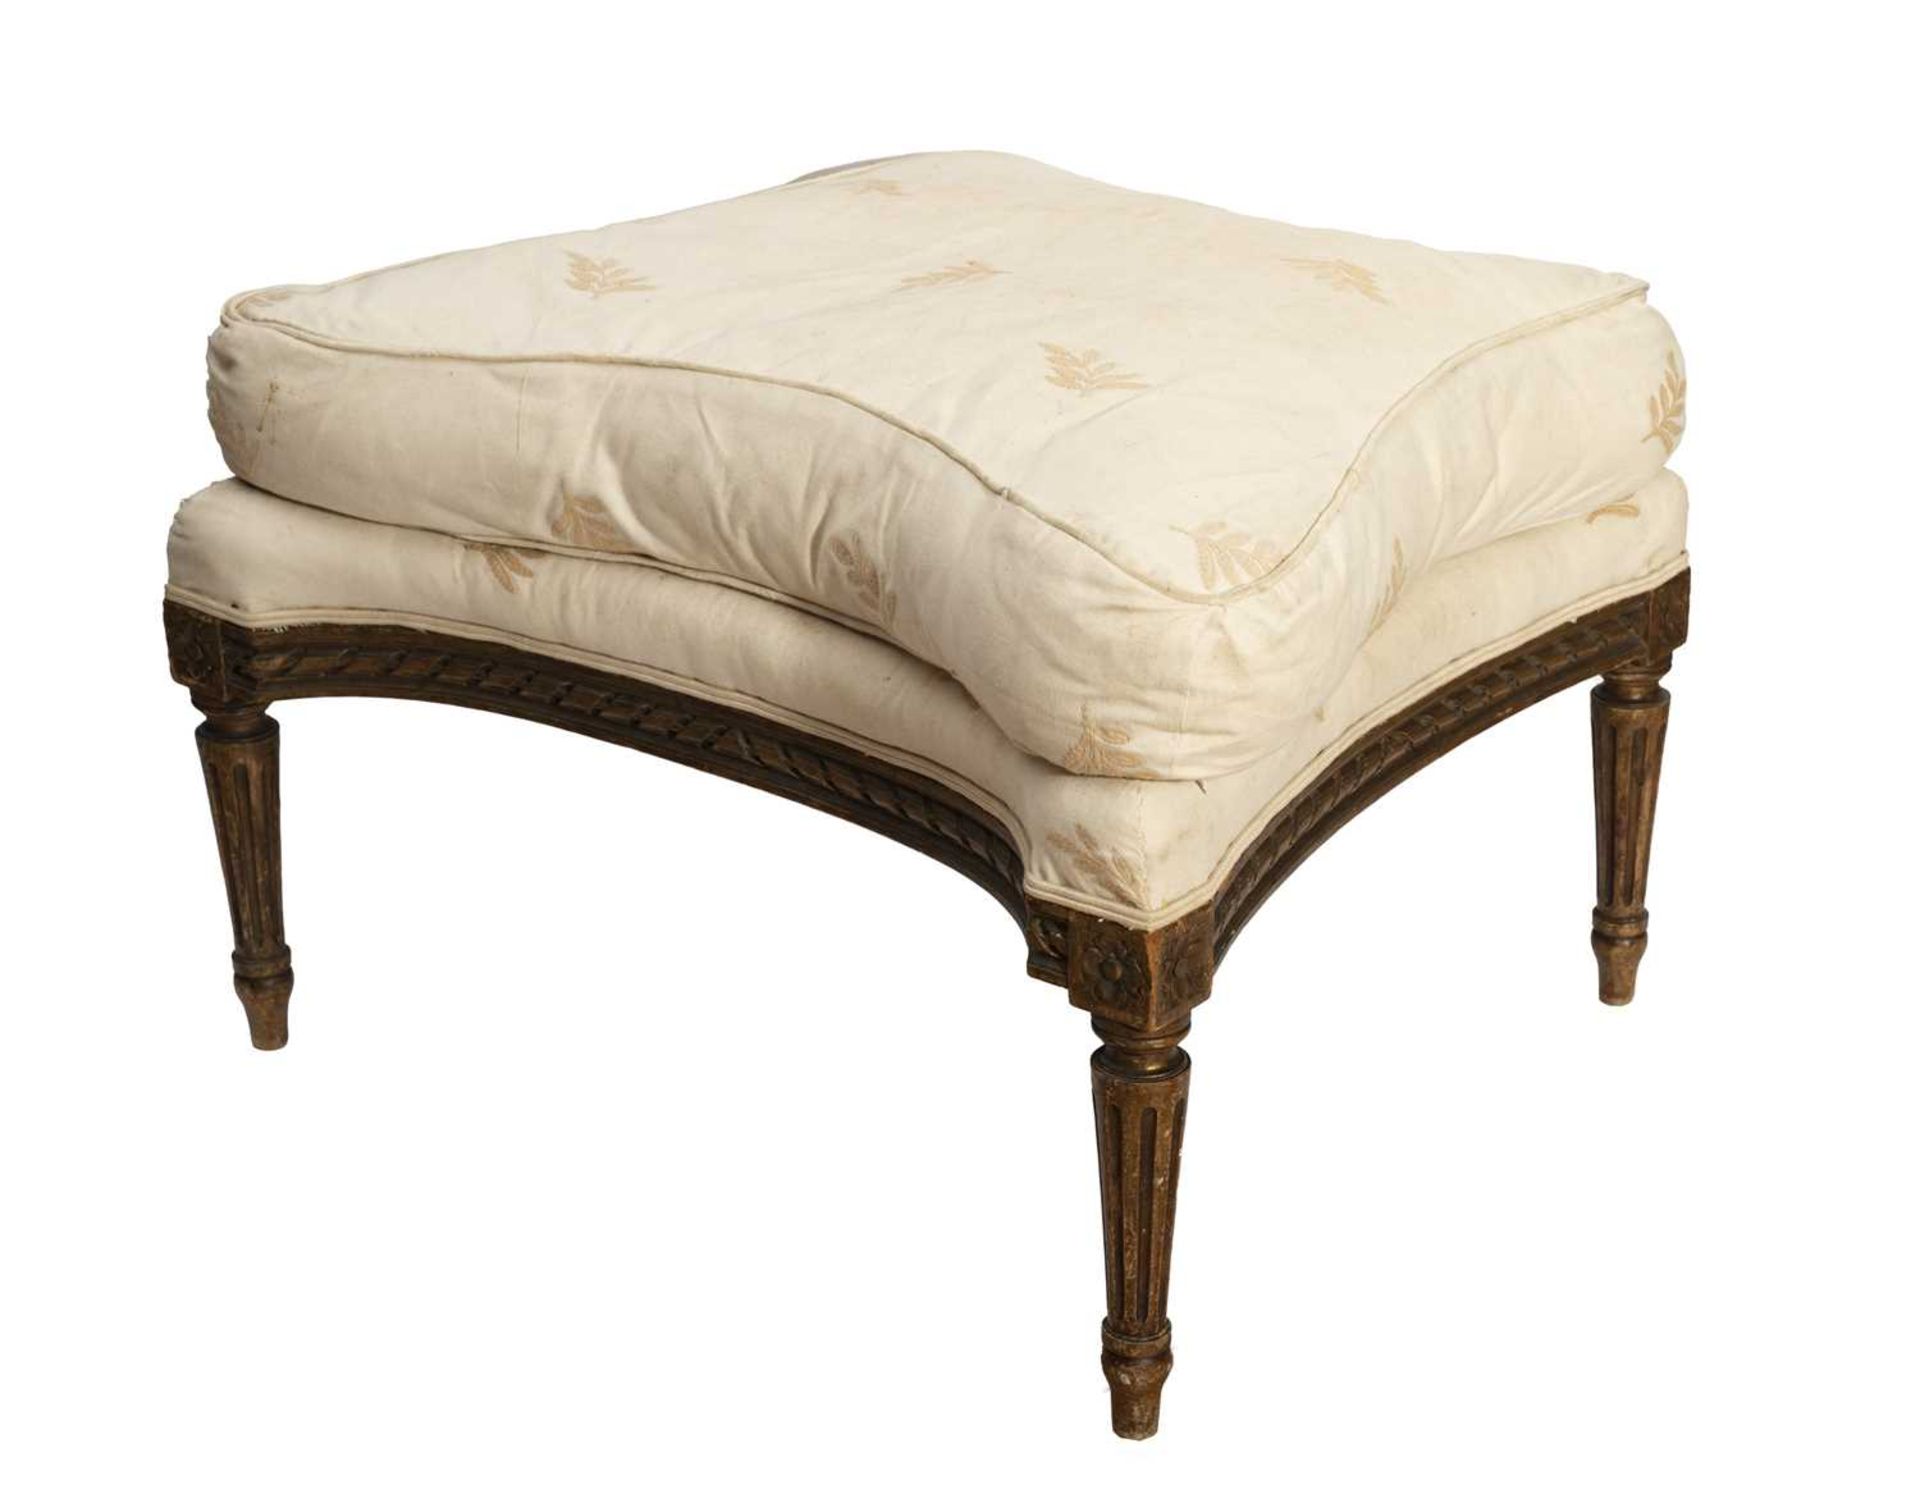 A LOUIS XVI STYLE GILTWOOD UPHOLSTERED STOOL - Image 2 of 2